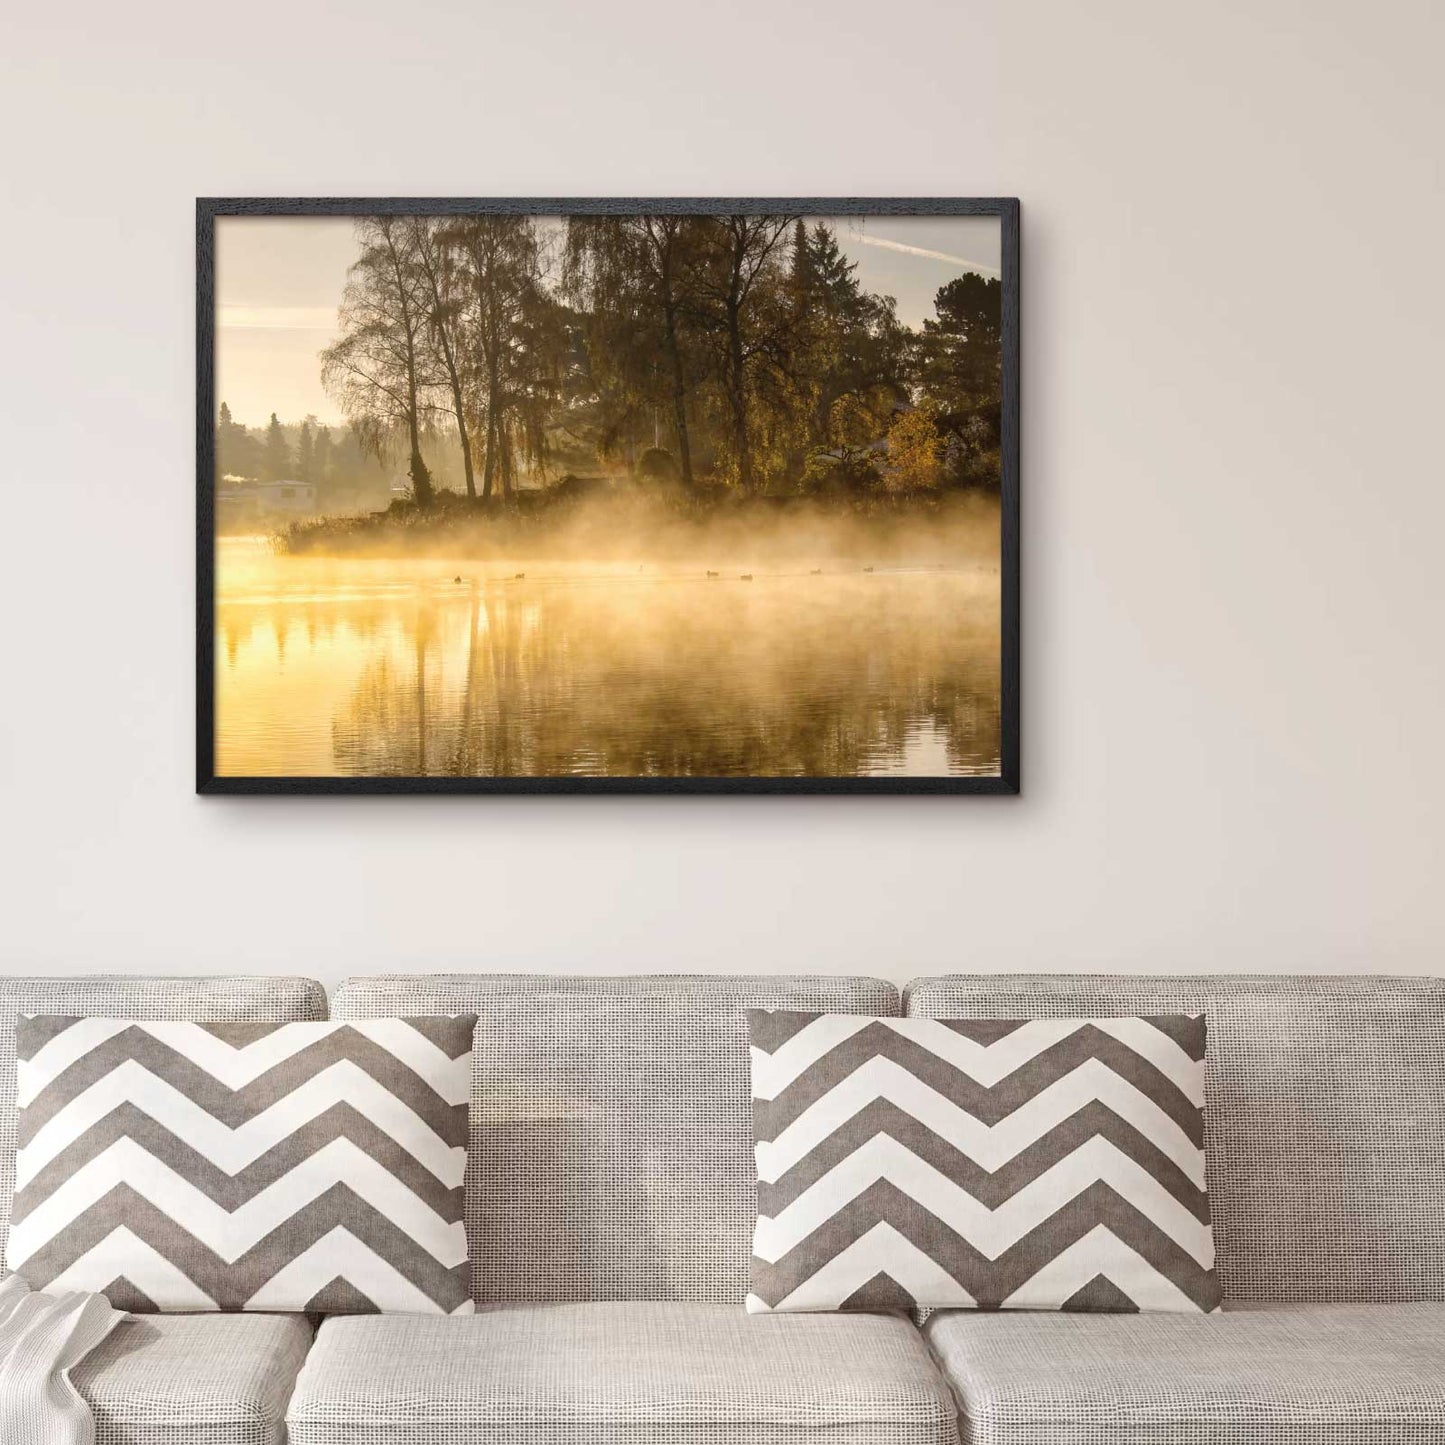 Nature poster with a yellow misty morning by a lake